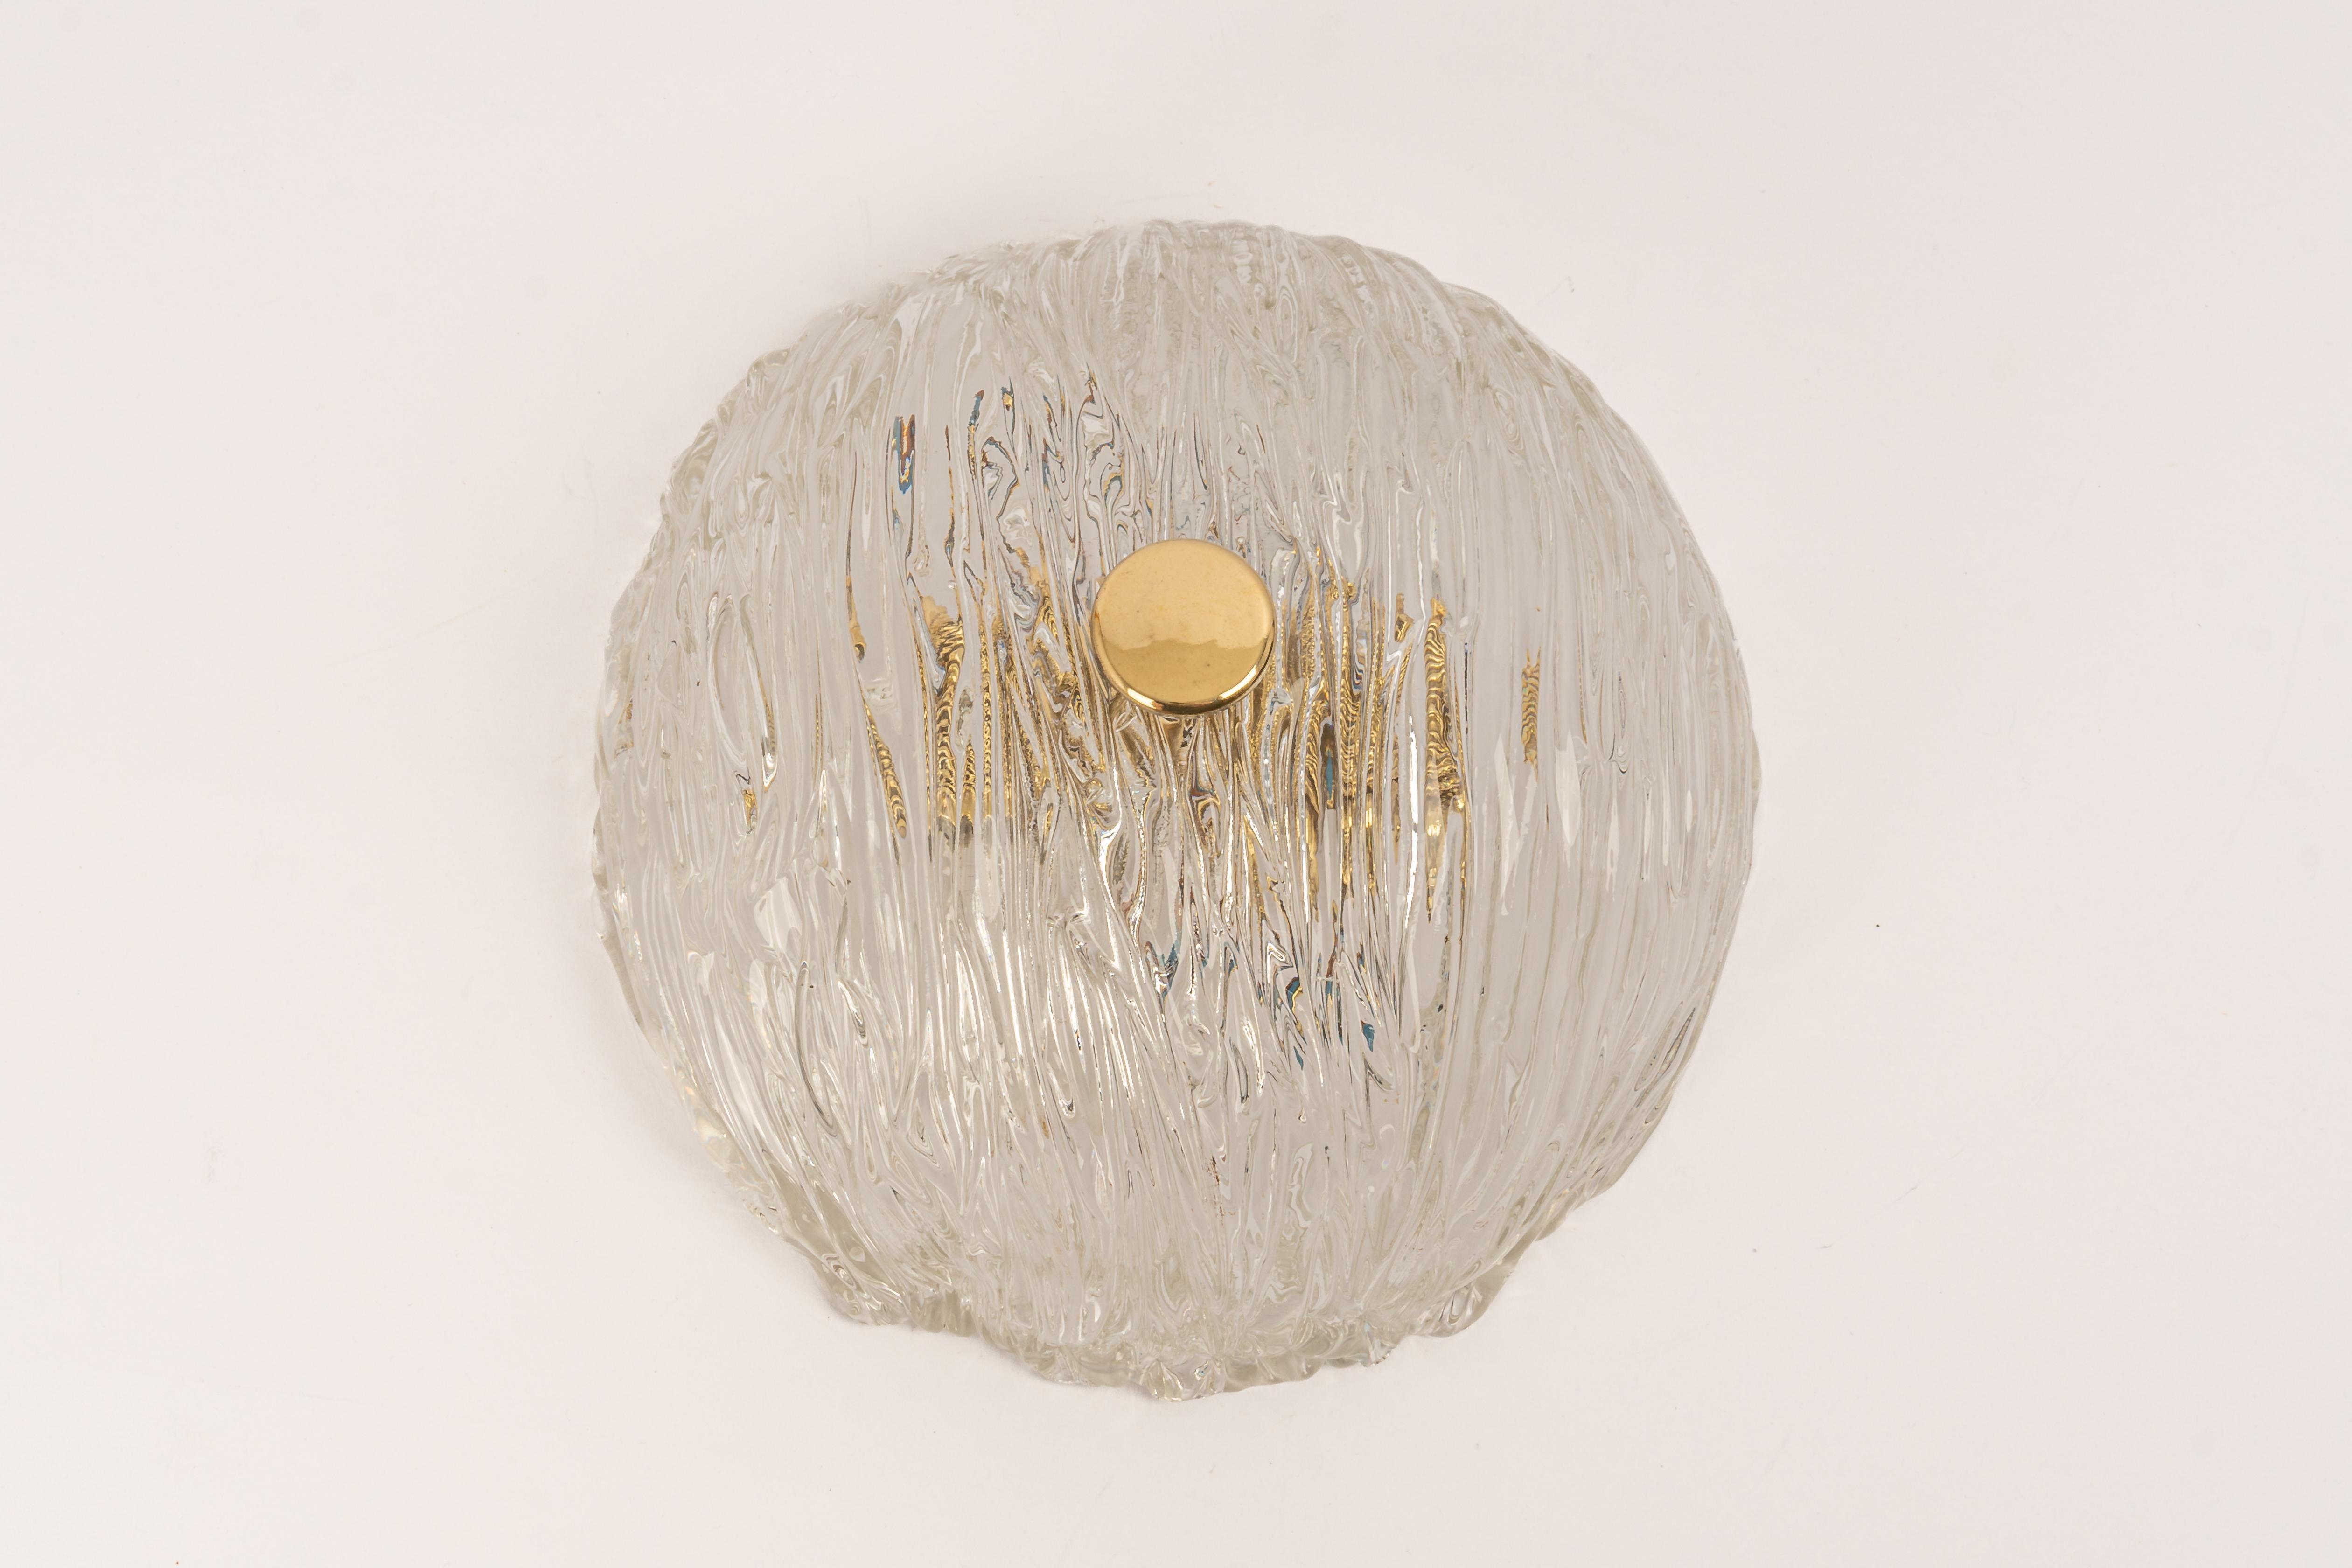 Petite Venini ceiling lights attributed to Carlo Scarpa for Venini, 1960s.
Wonderful light effect.
The heavily textured and slightly iridescent glass dome is held in place by a brass knob

High quality and in very good condition. Cleaned,